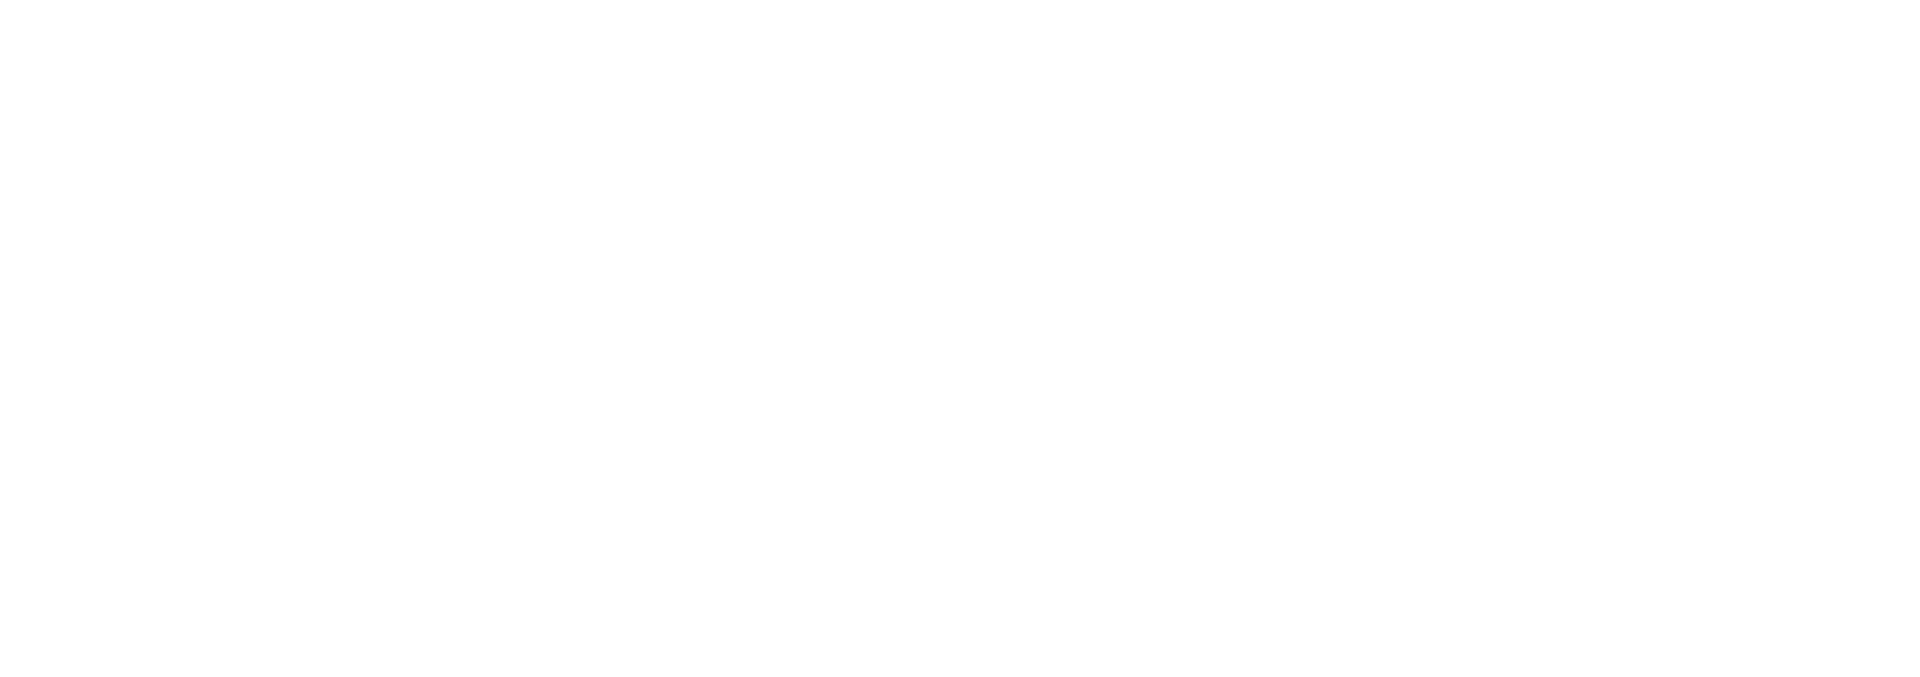 dotted curled line dividing sections